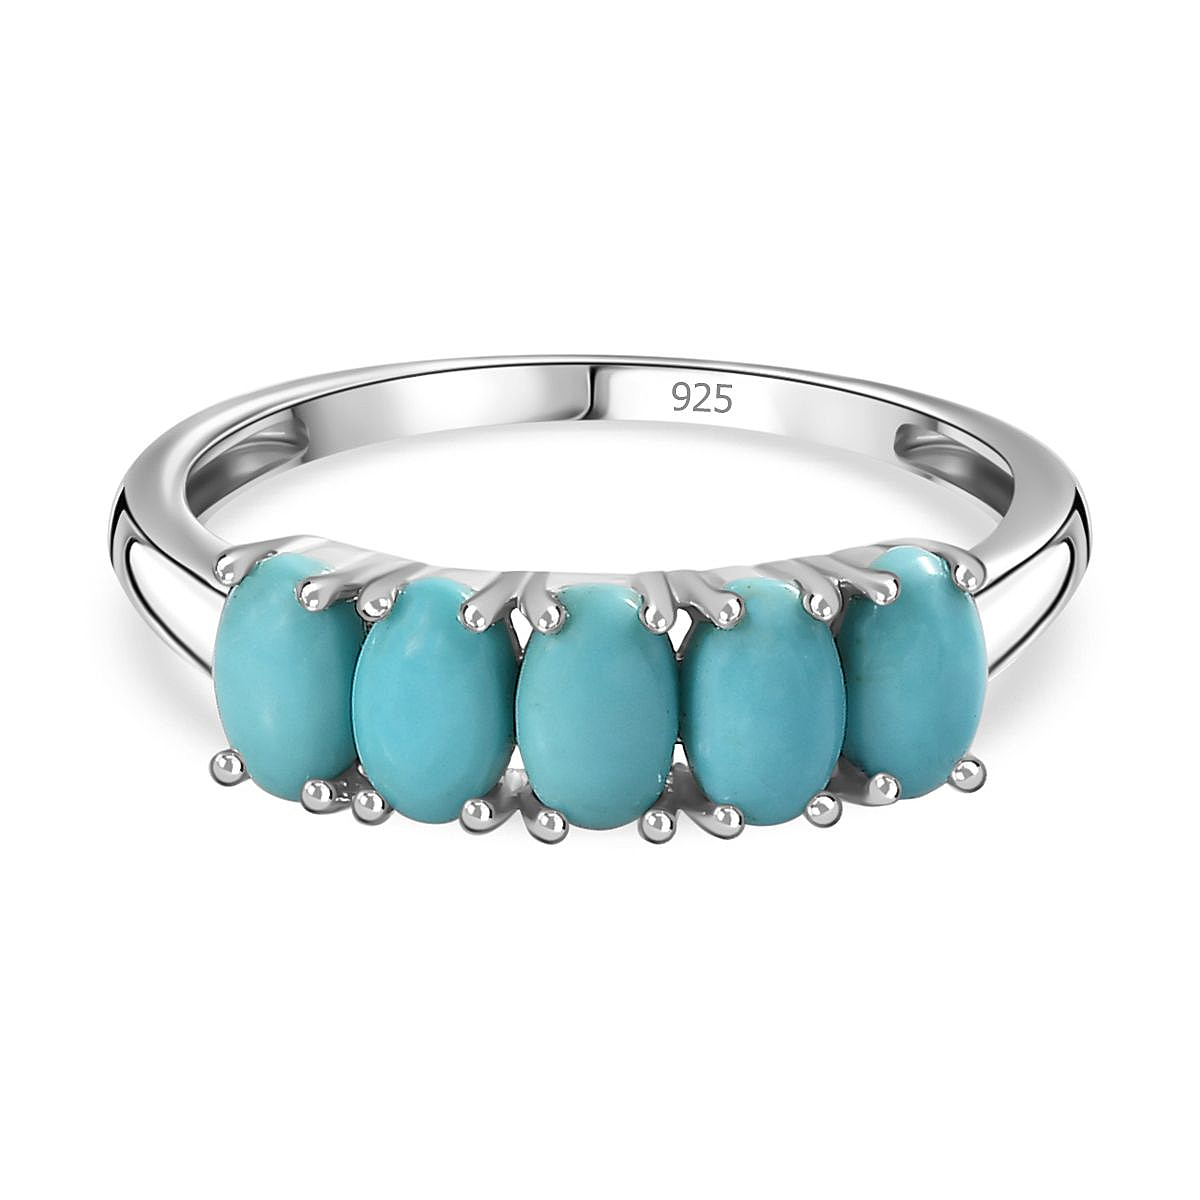 Sleeping Beauty Turquoise  Ring in Platinum Overlay Sterling Silver 1.00 ct  1.205  Ct.